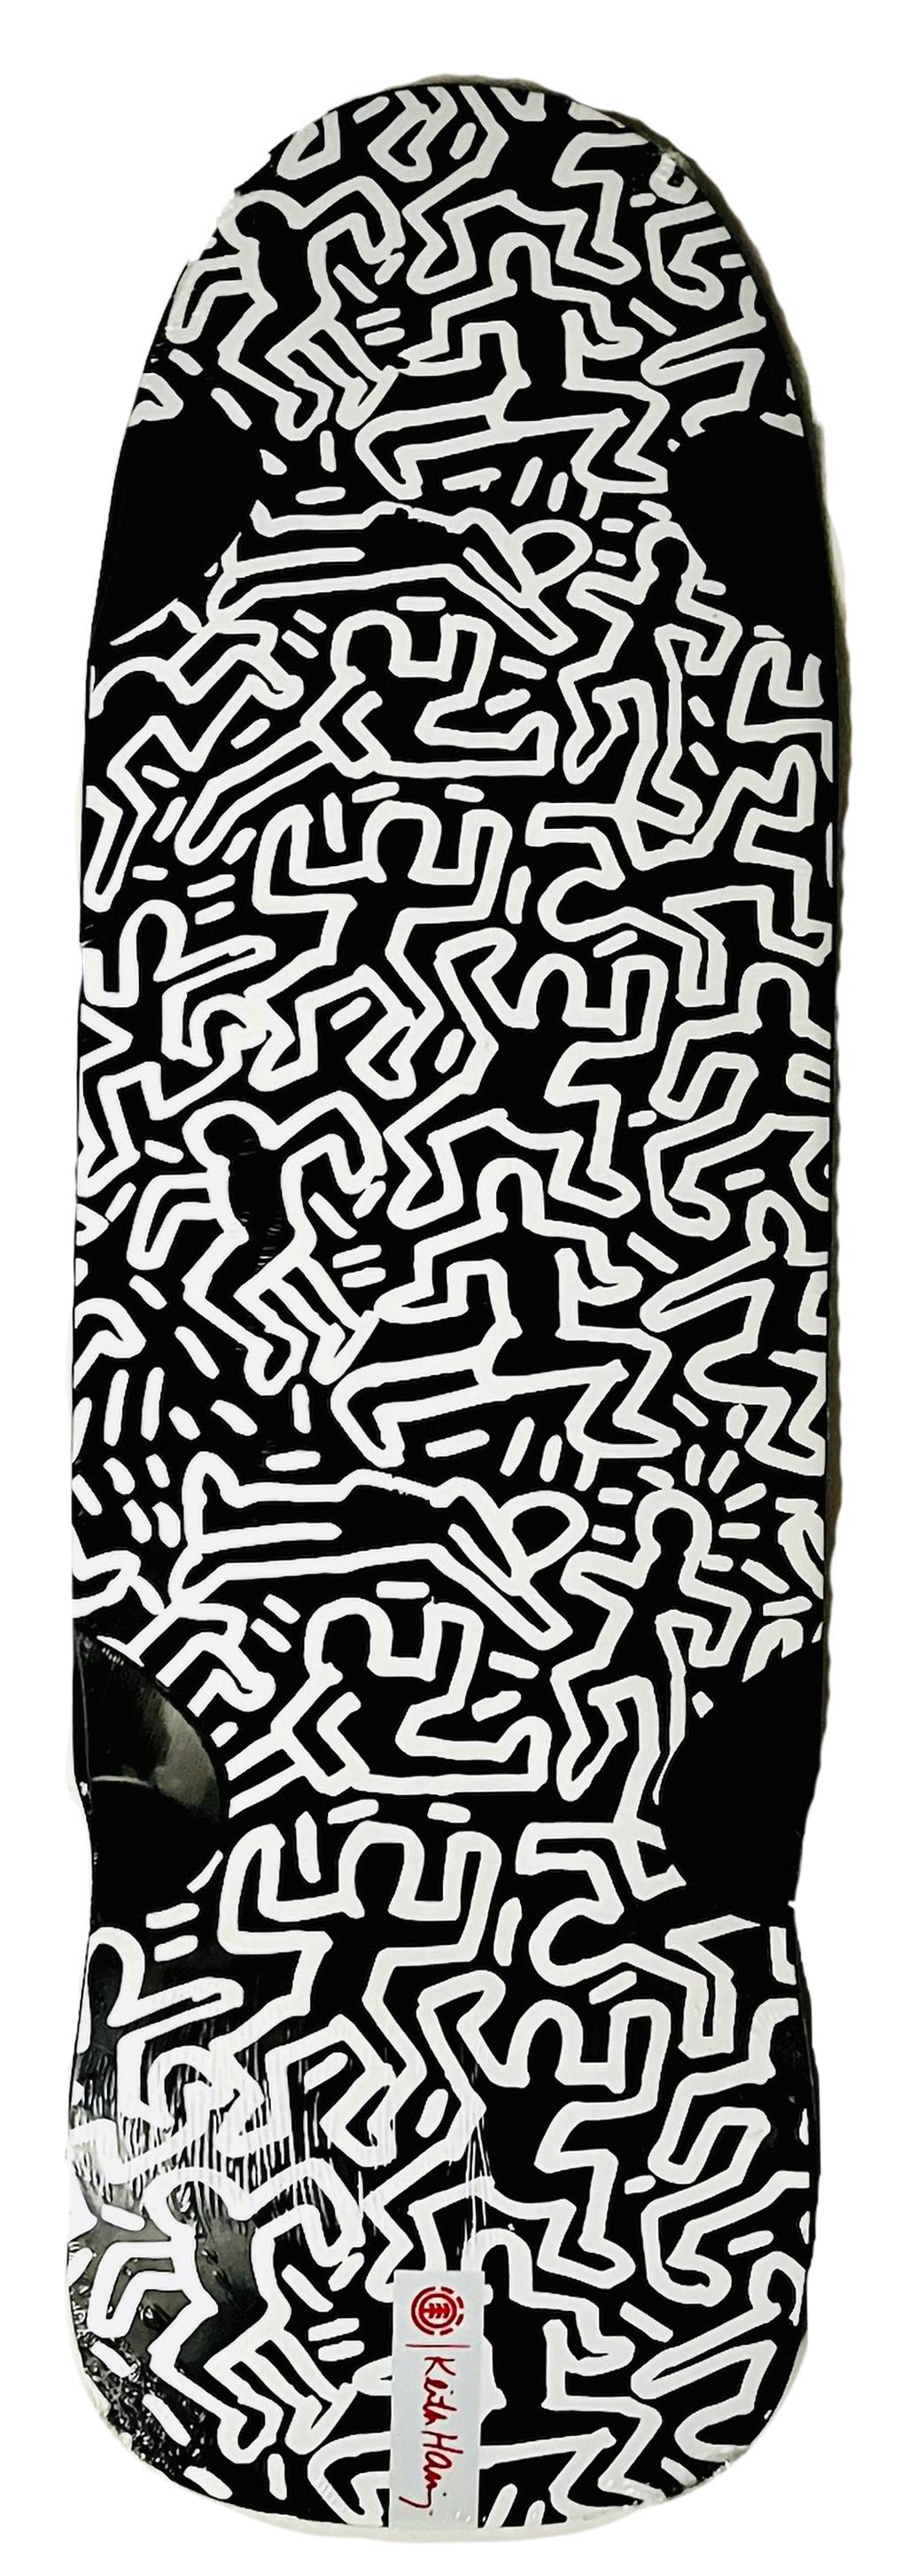 Keith Haring Skateboard Deck (Keith Haring three eyed face) - Pop Art Sculpture by (after) Keith Haring